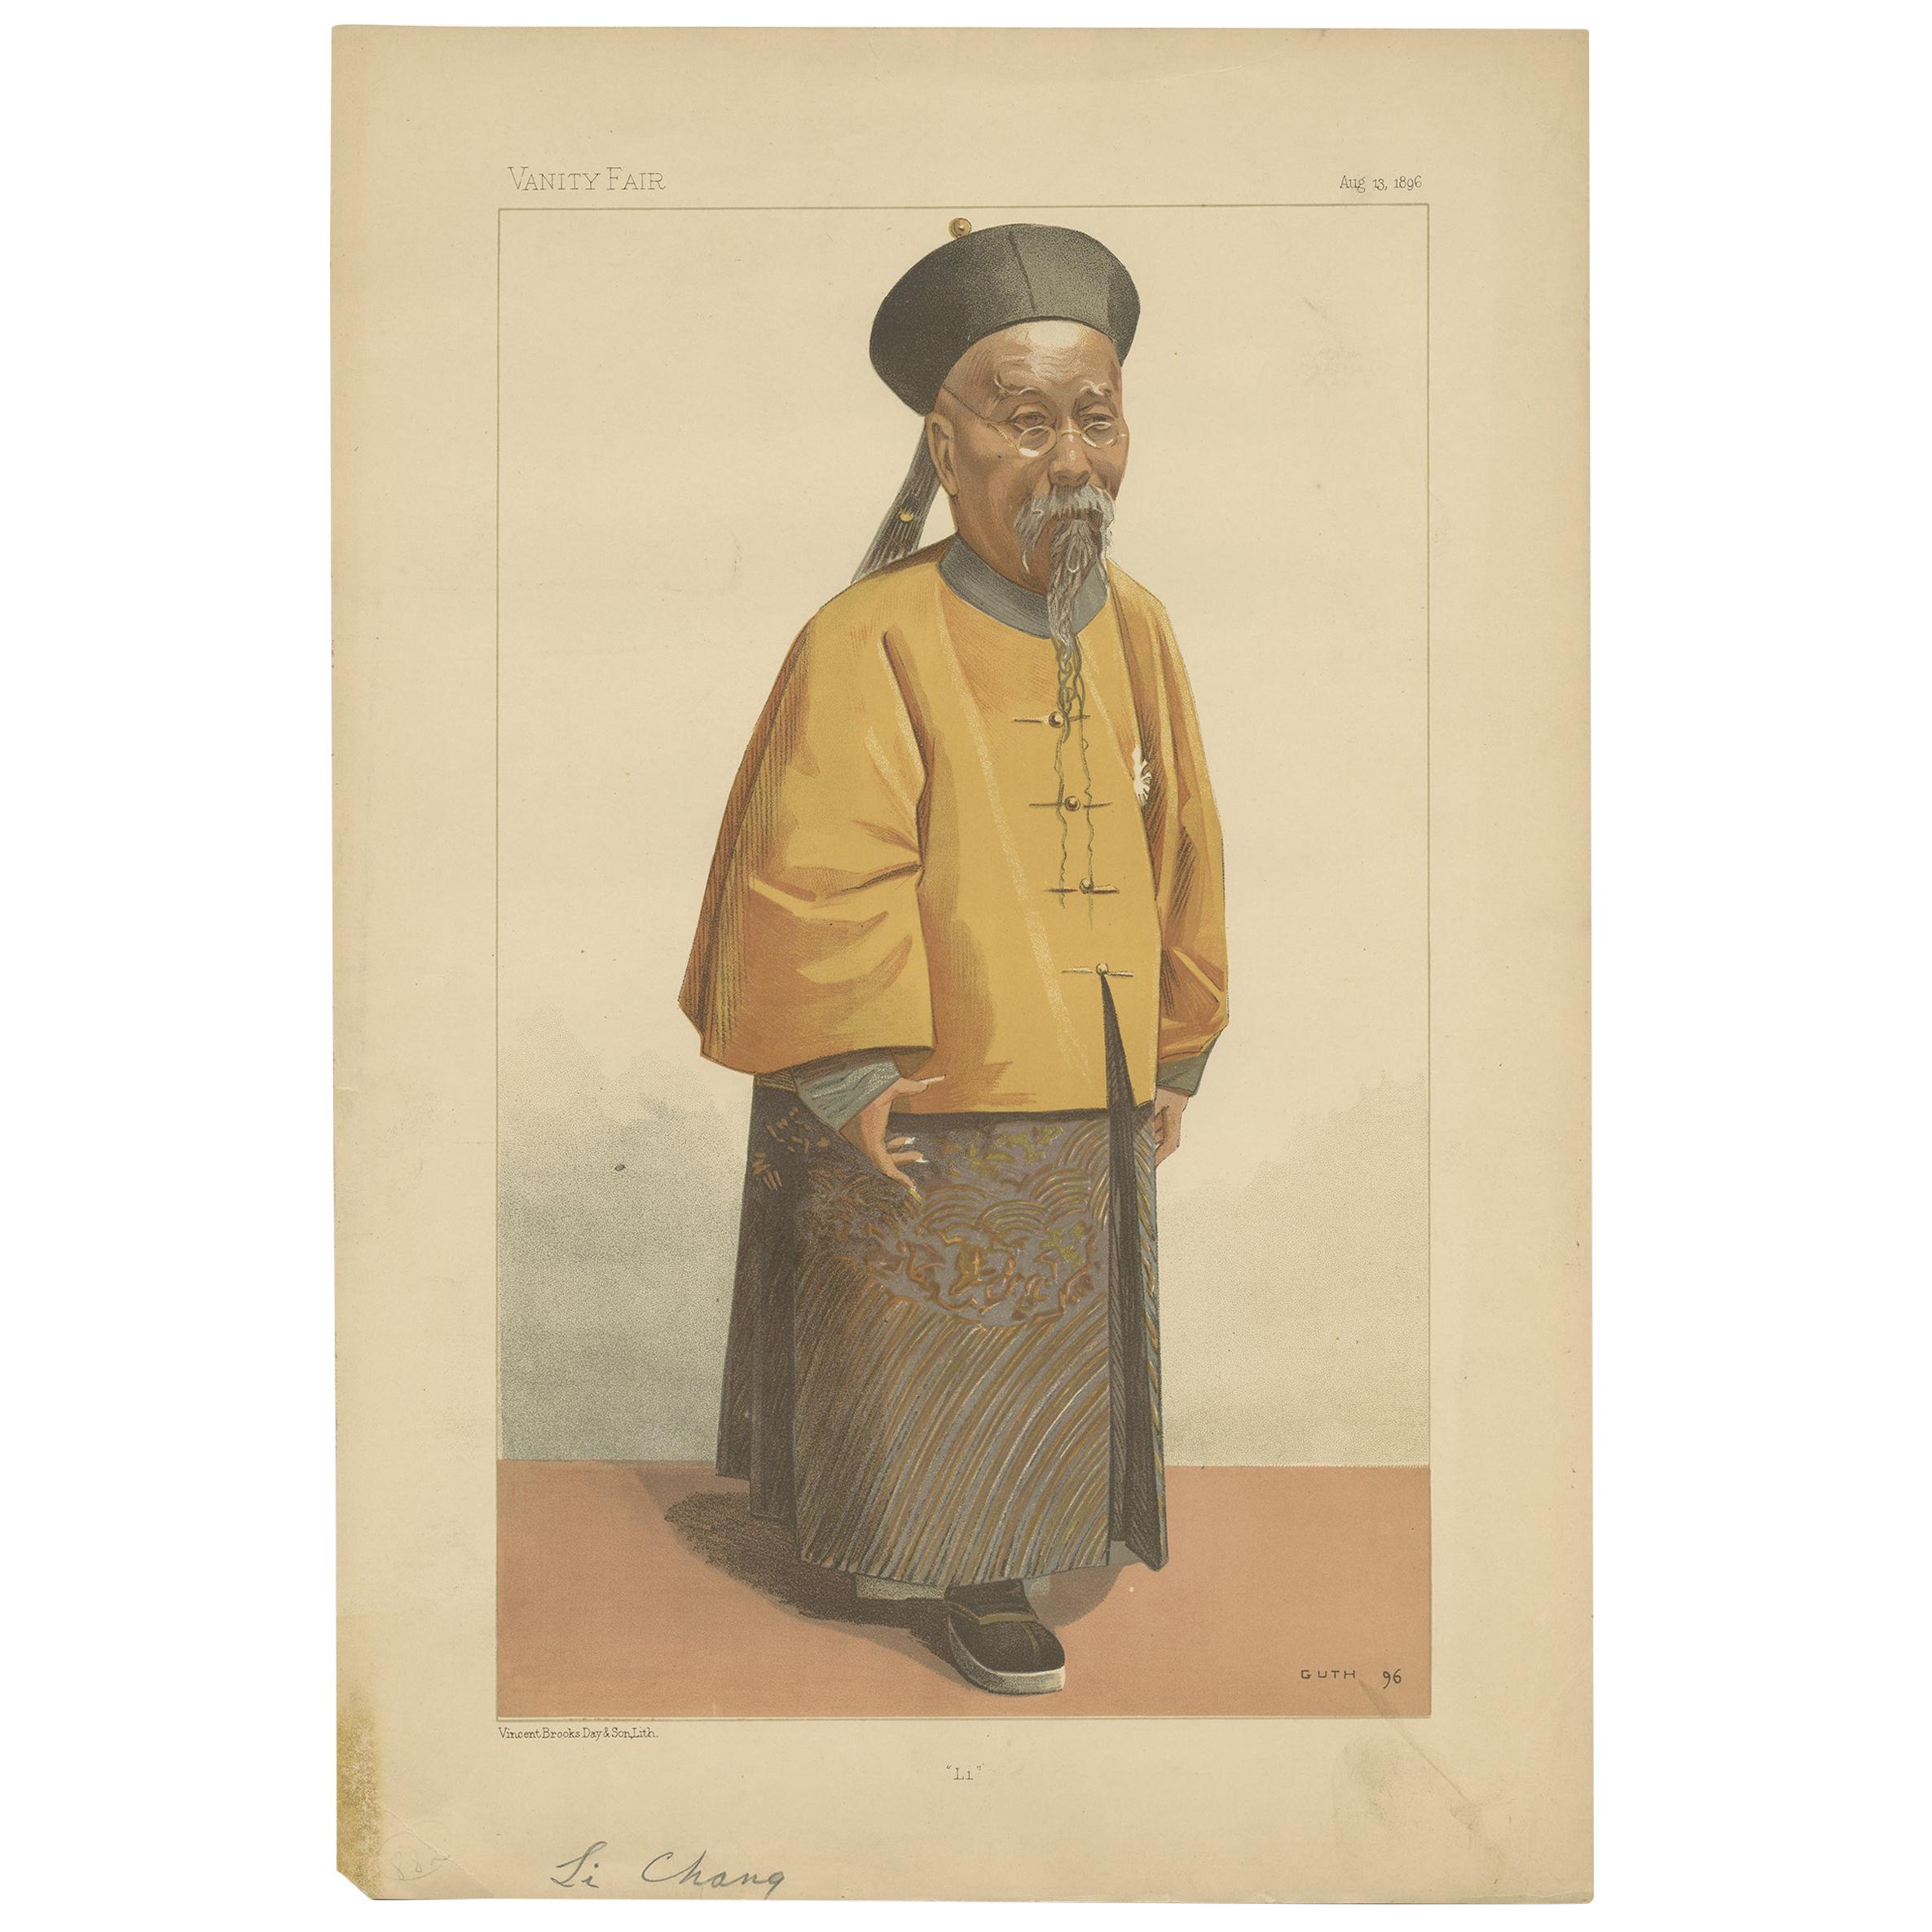 Antique Print of Li Hung Chang published in the Vanity Fair, 1896